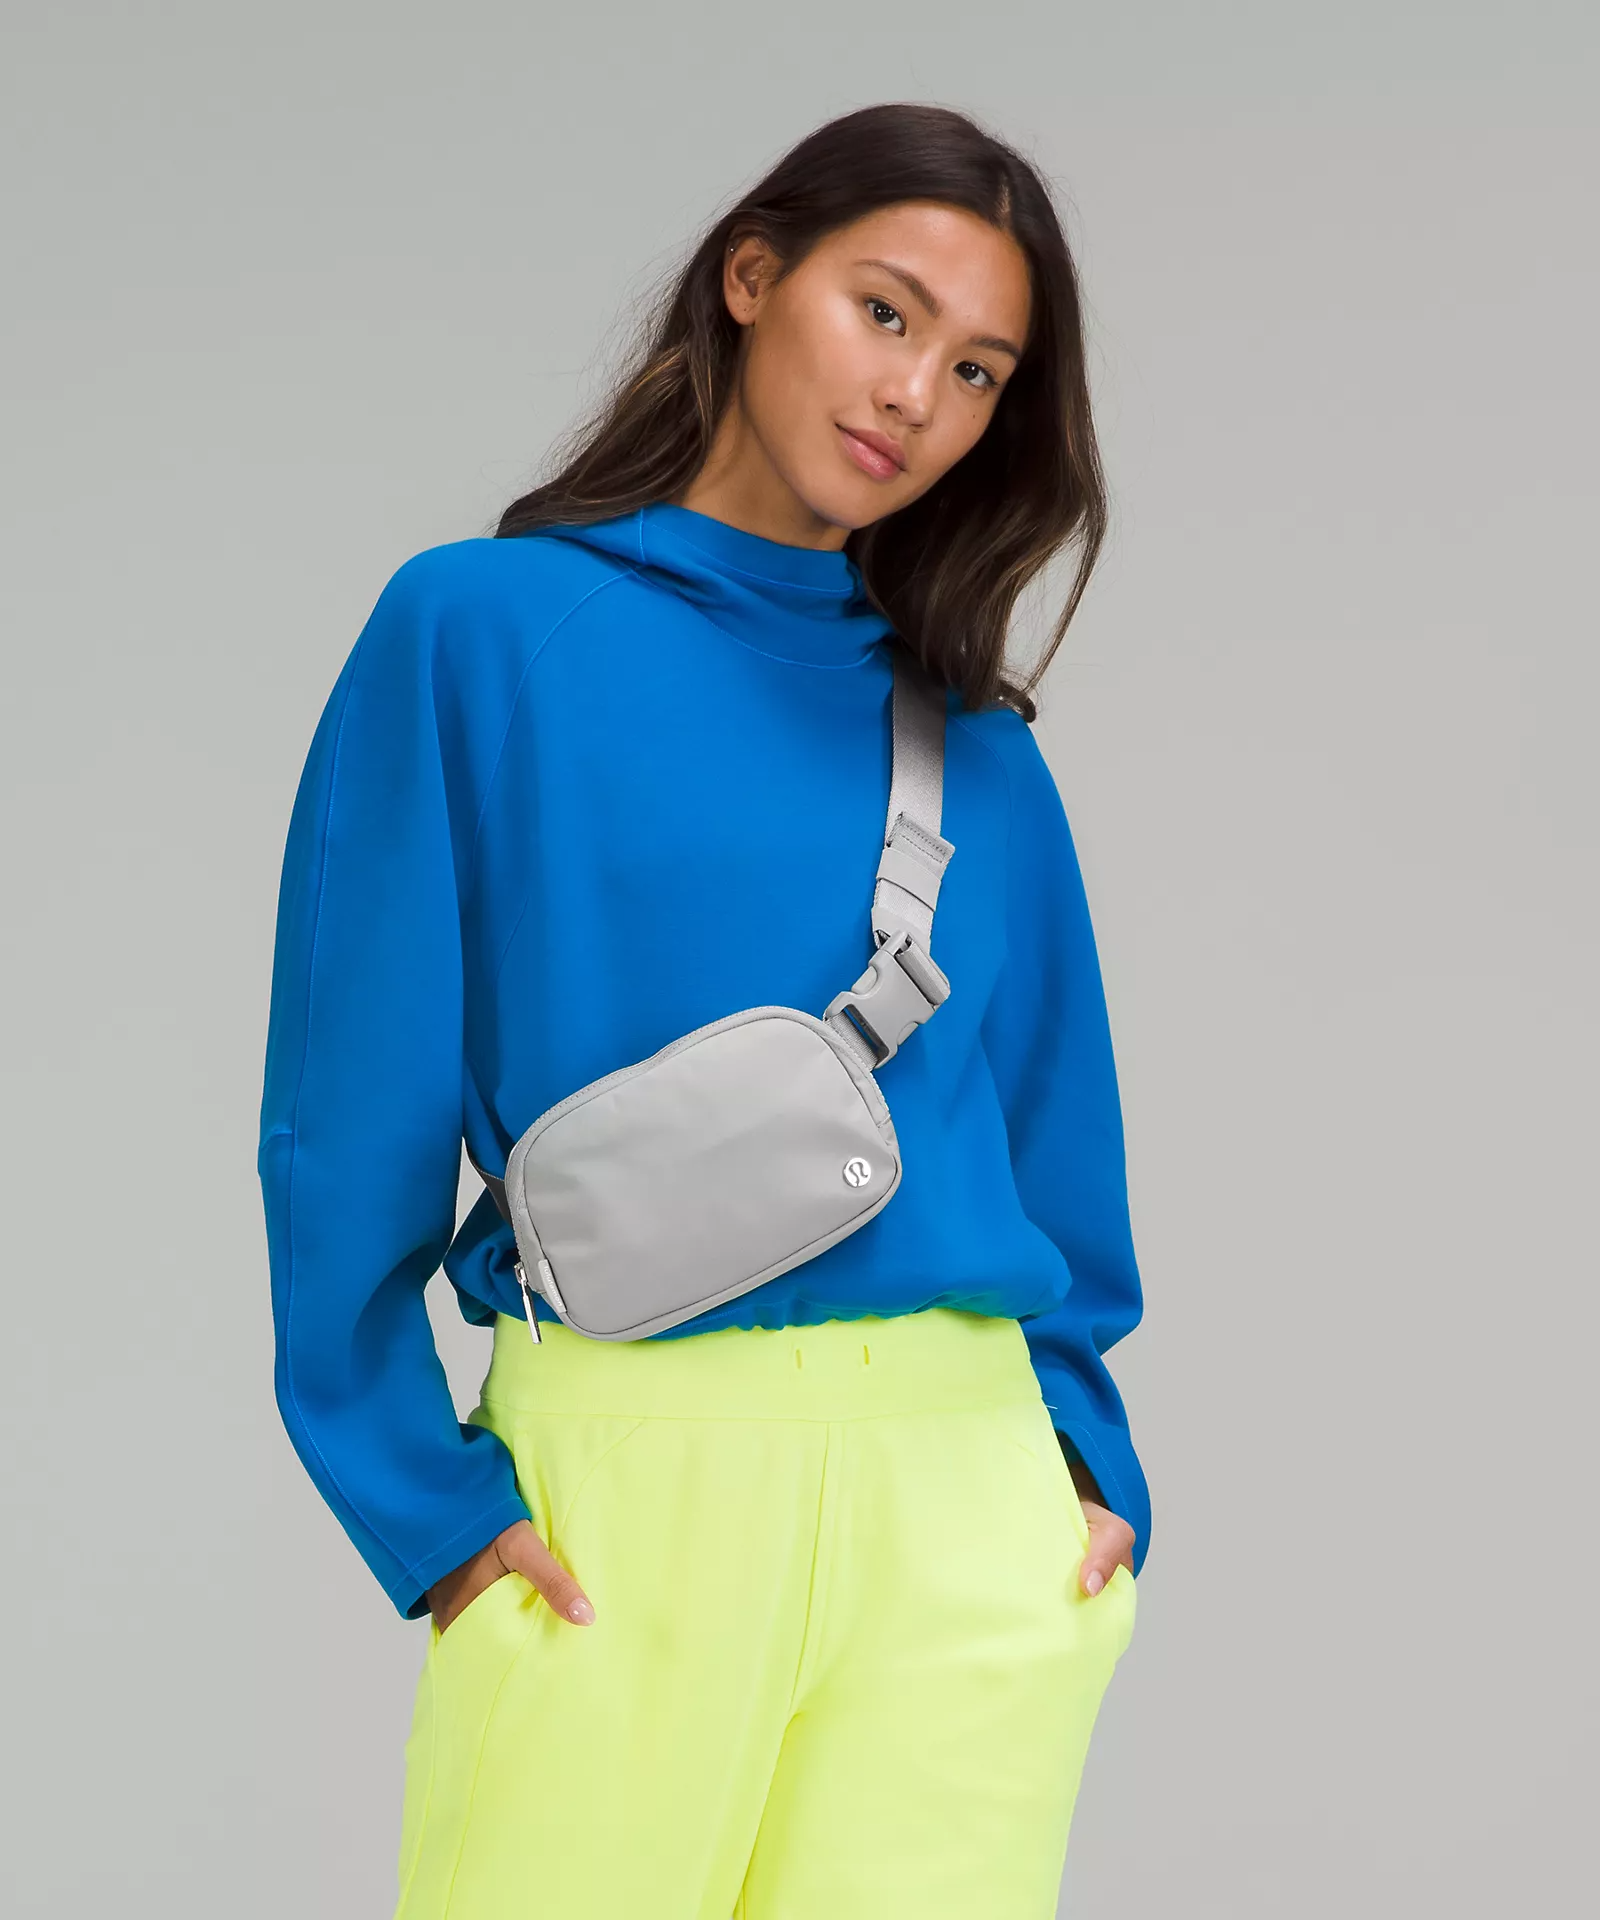 5 Cute and Sustainable Fanny Packs & Bum Bags